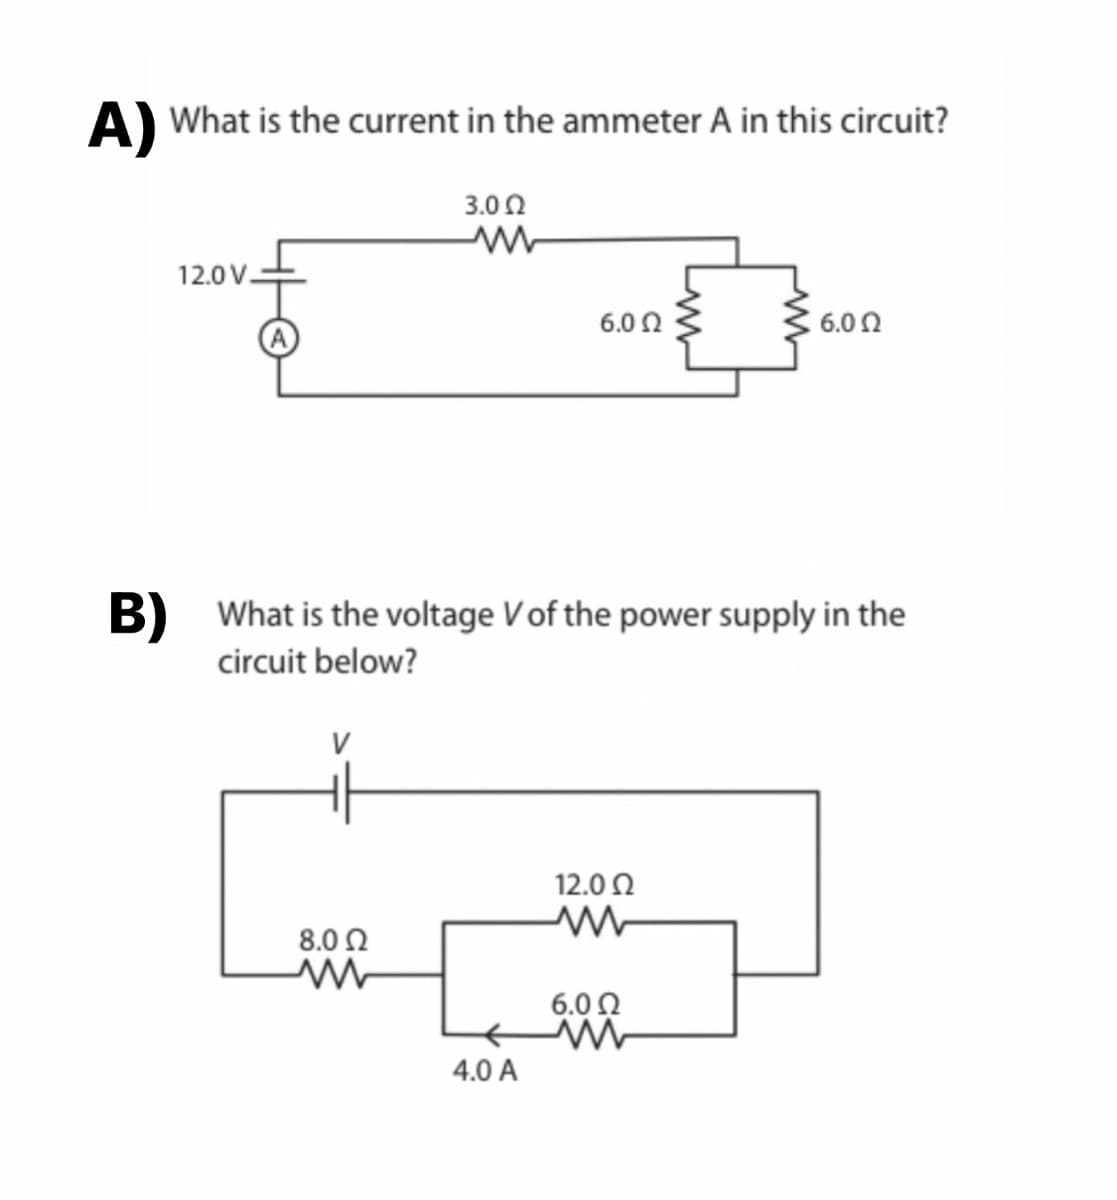 A) What is the current in the ammeter A in this circuit?
3.002
www
12.0V.
8.0 Ω
ww
6.0 Ω
B) What is the voltage V of the power supply in the
circuit below?
4.0 A
12.0 Ω
M
6.0 Ω
6.0 Ω